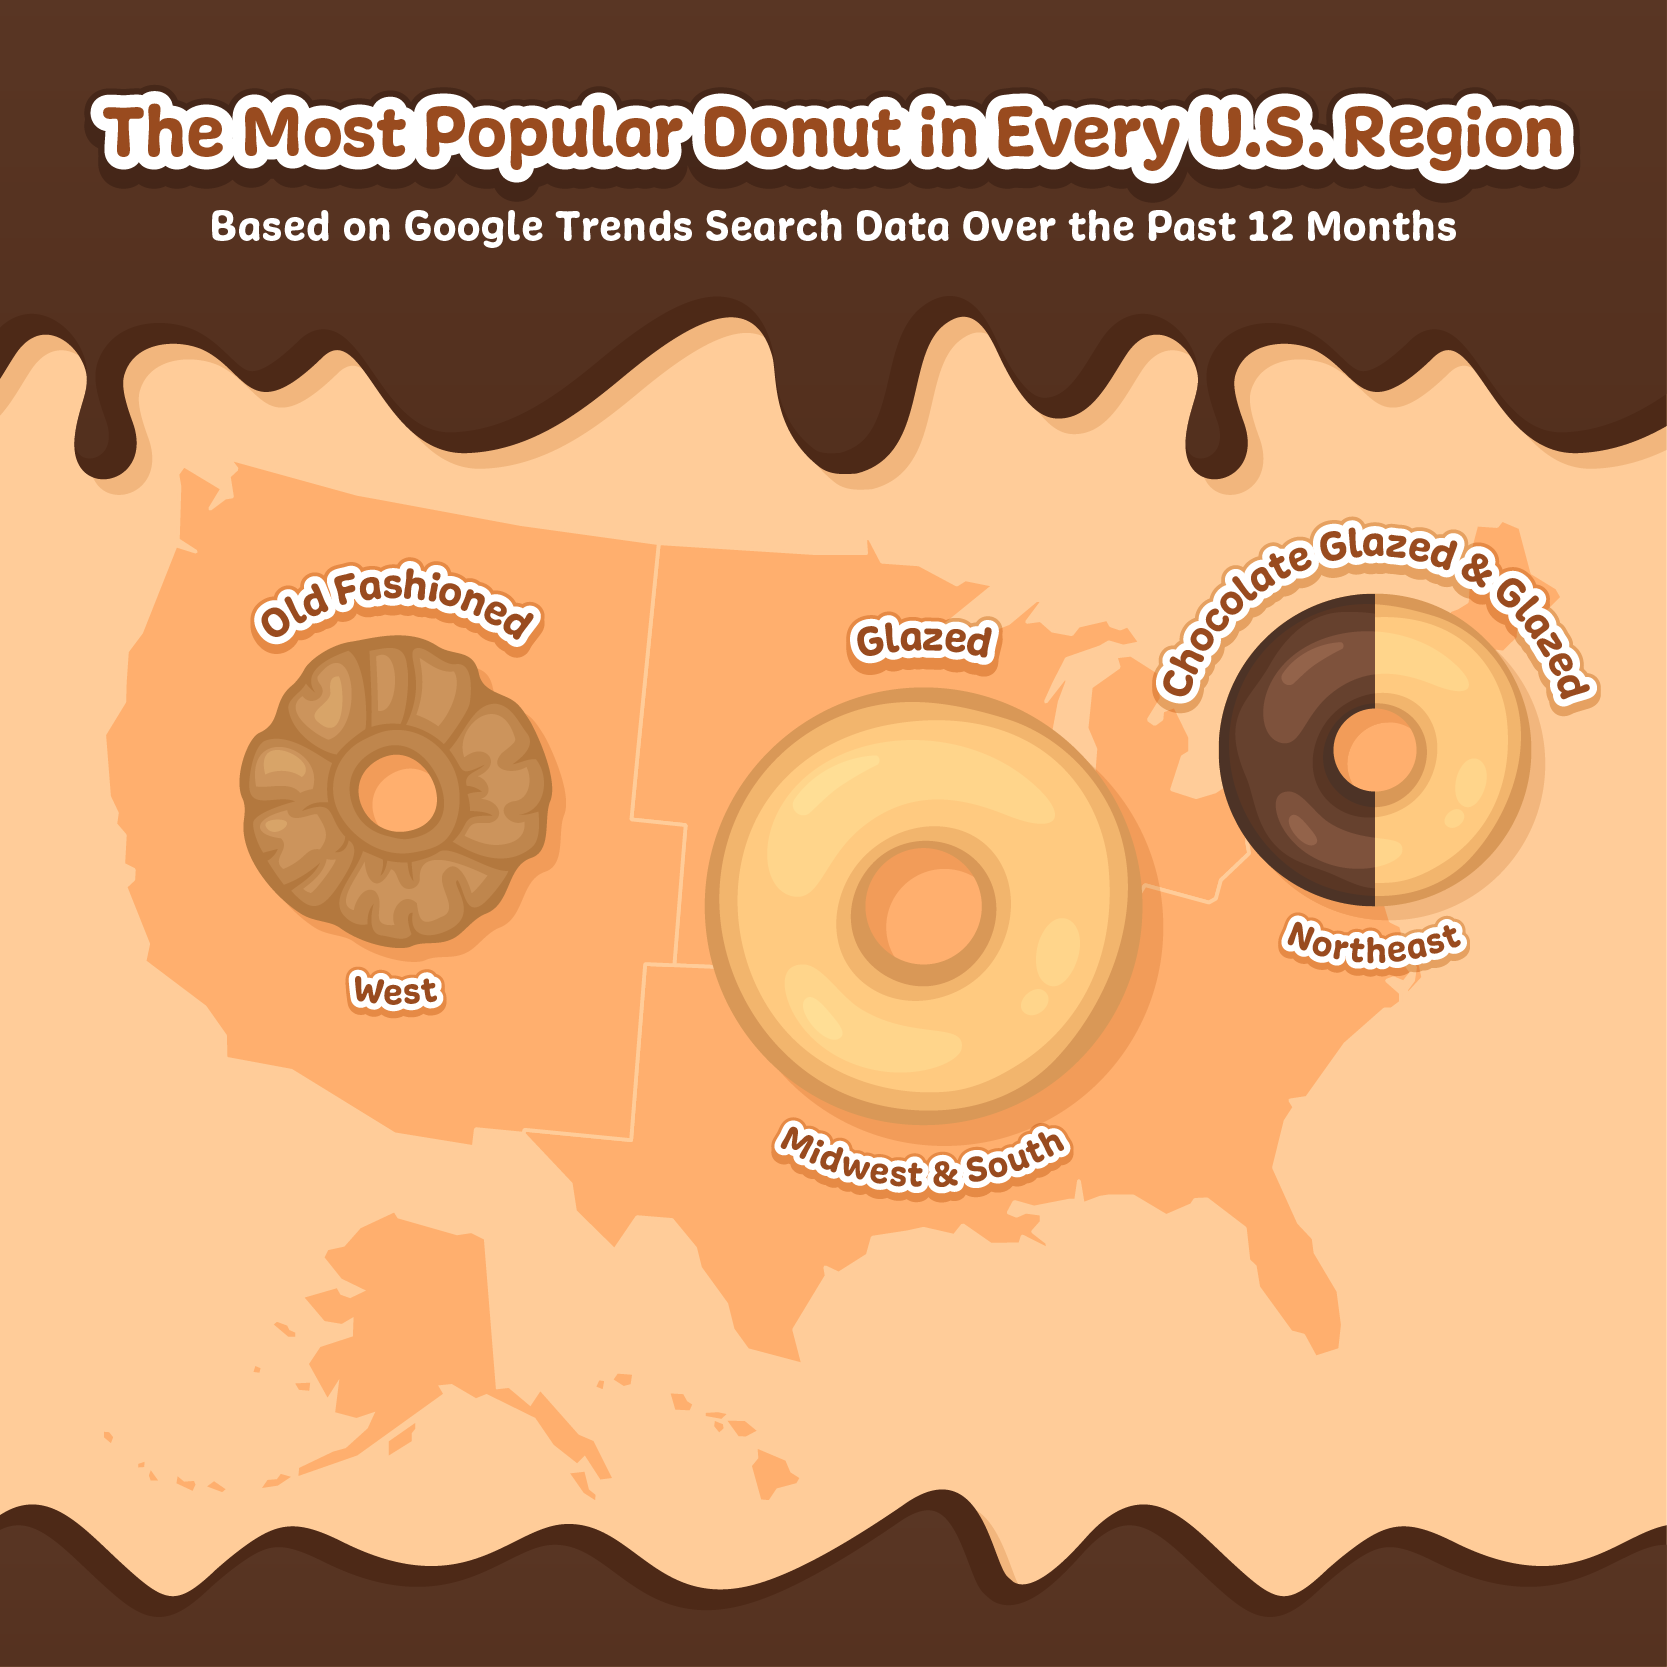 Map depicting the most popular donut flavor in every U.S. region.